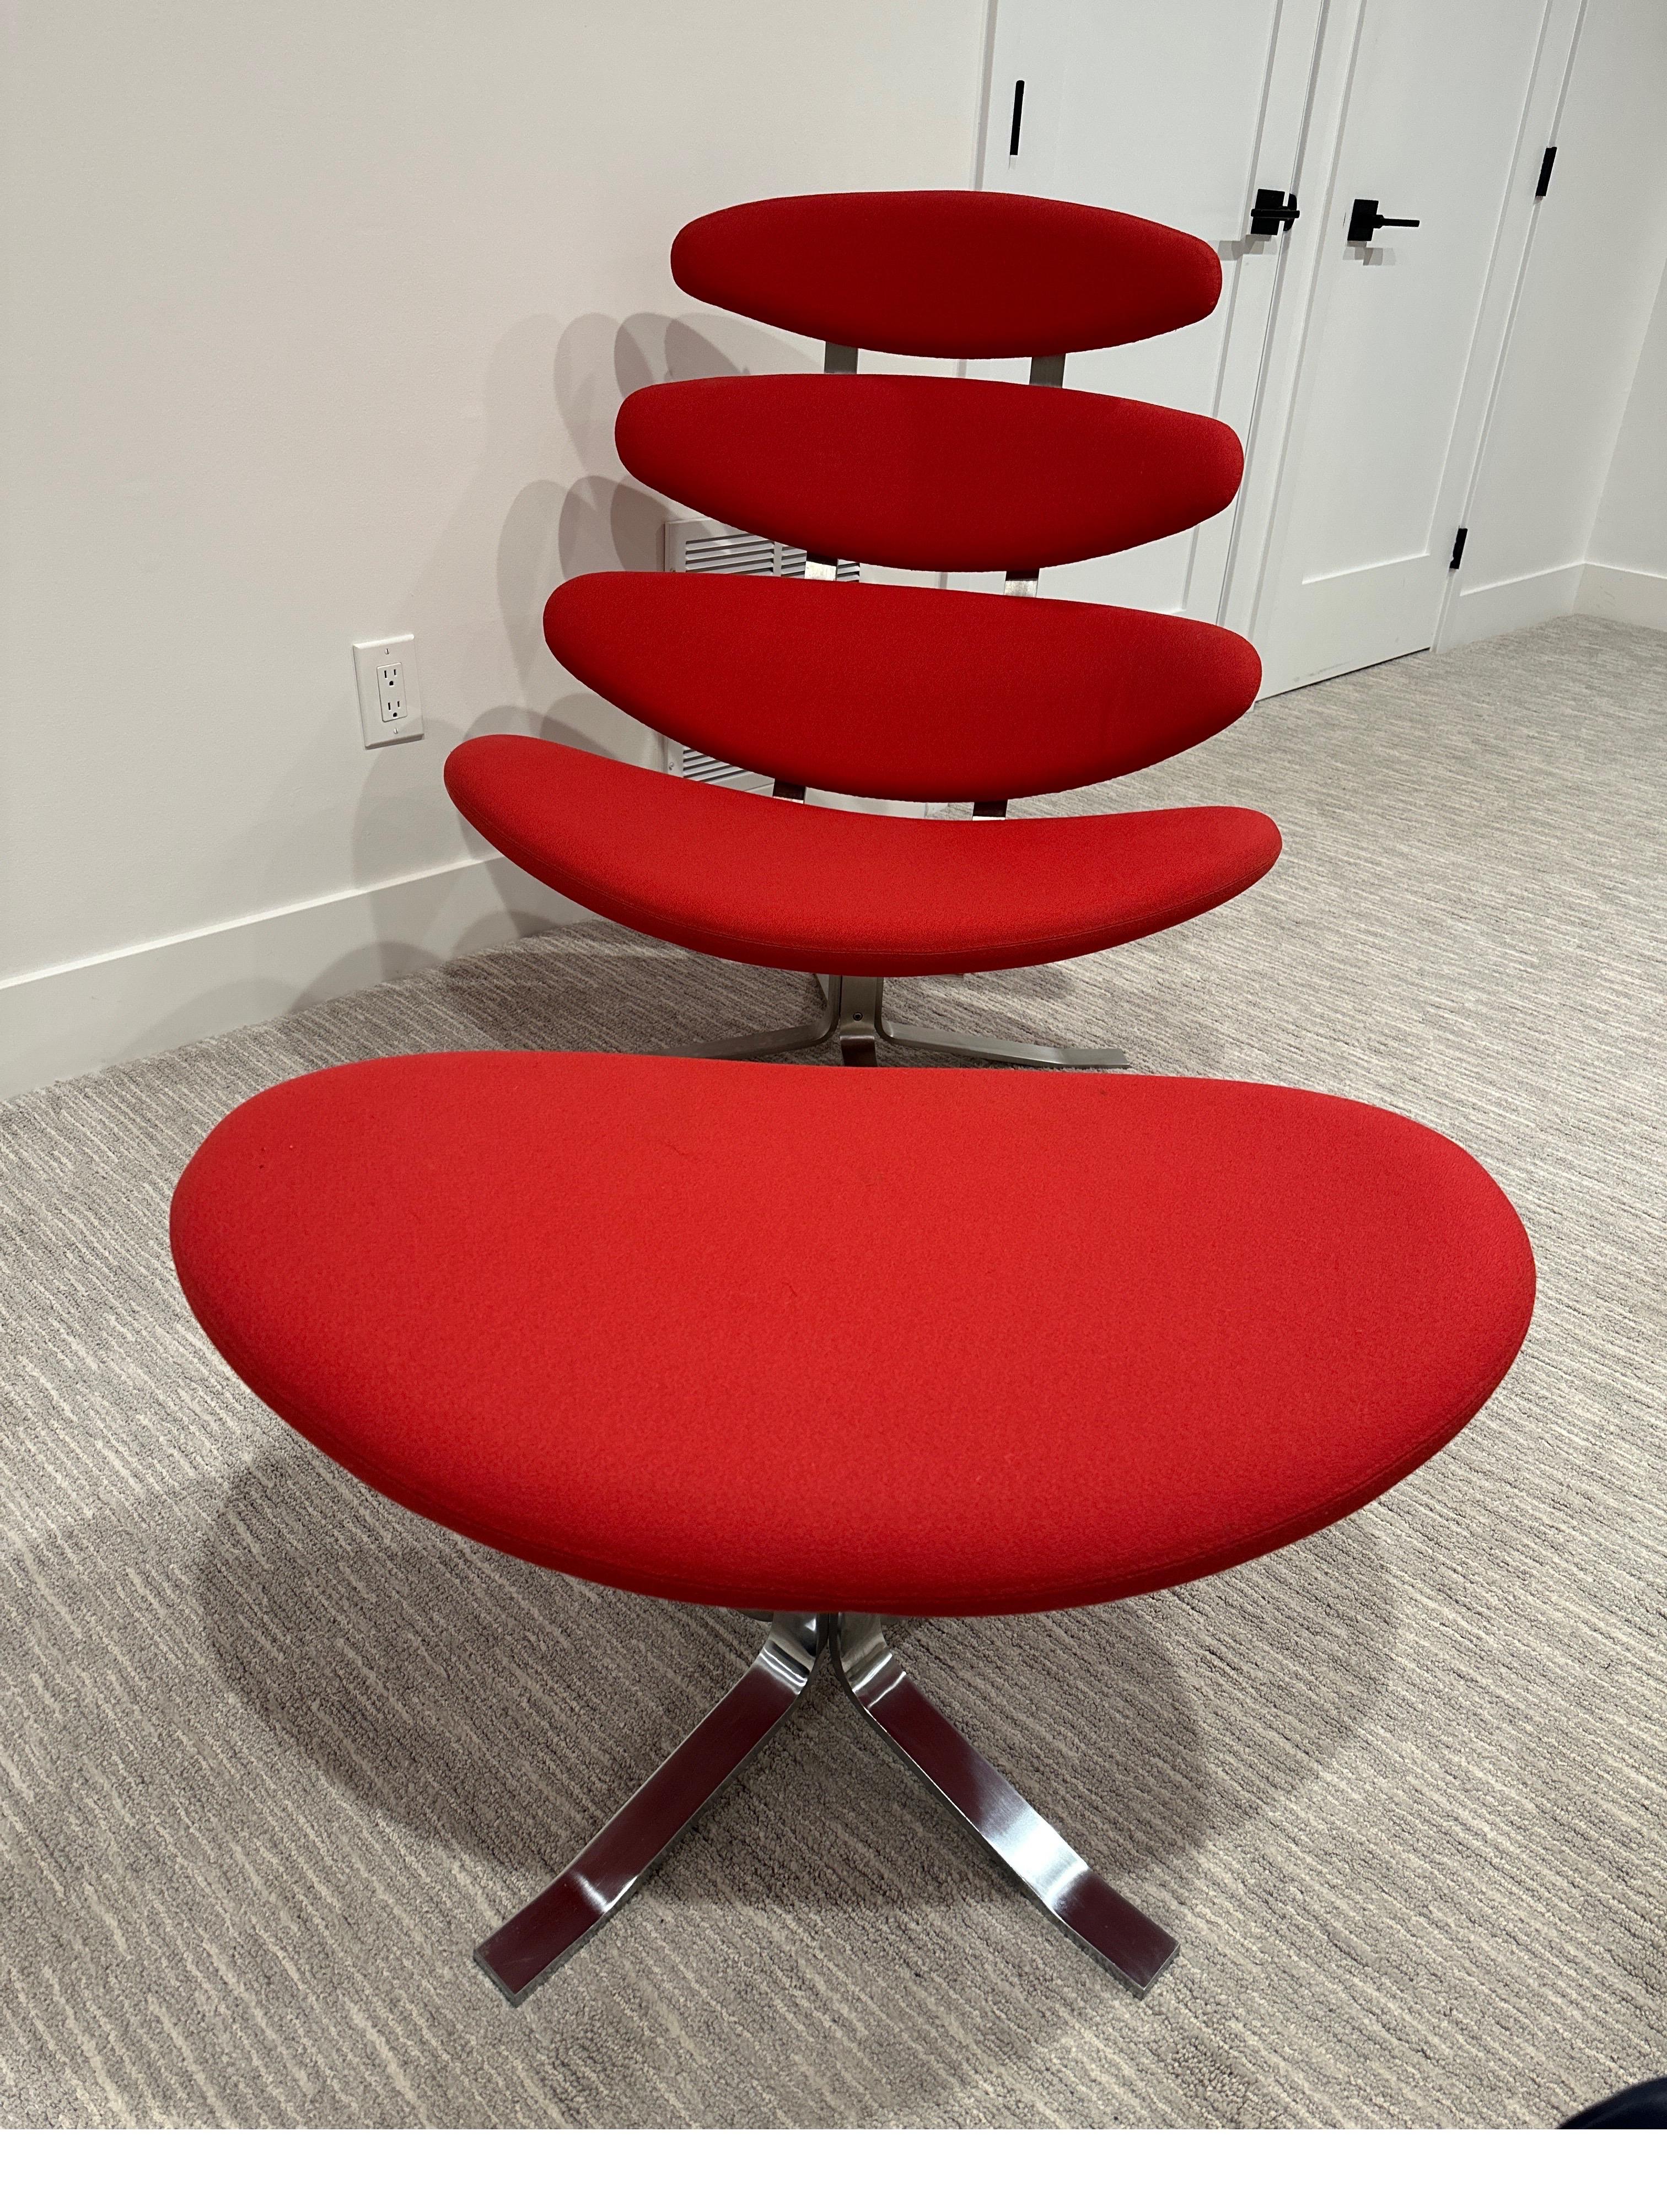 Poul M. Volther Corona chair for Erik Jørgensen in 1960s. Four padded cushions, in a vibrant red, ascend a stainless-steel frame that swivels at chair base, creating a lounge chair that is both comfortable and visually appealing.

Poul